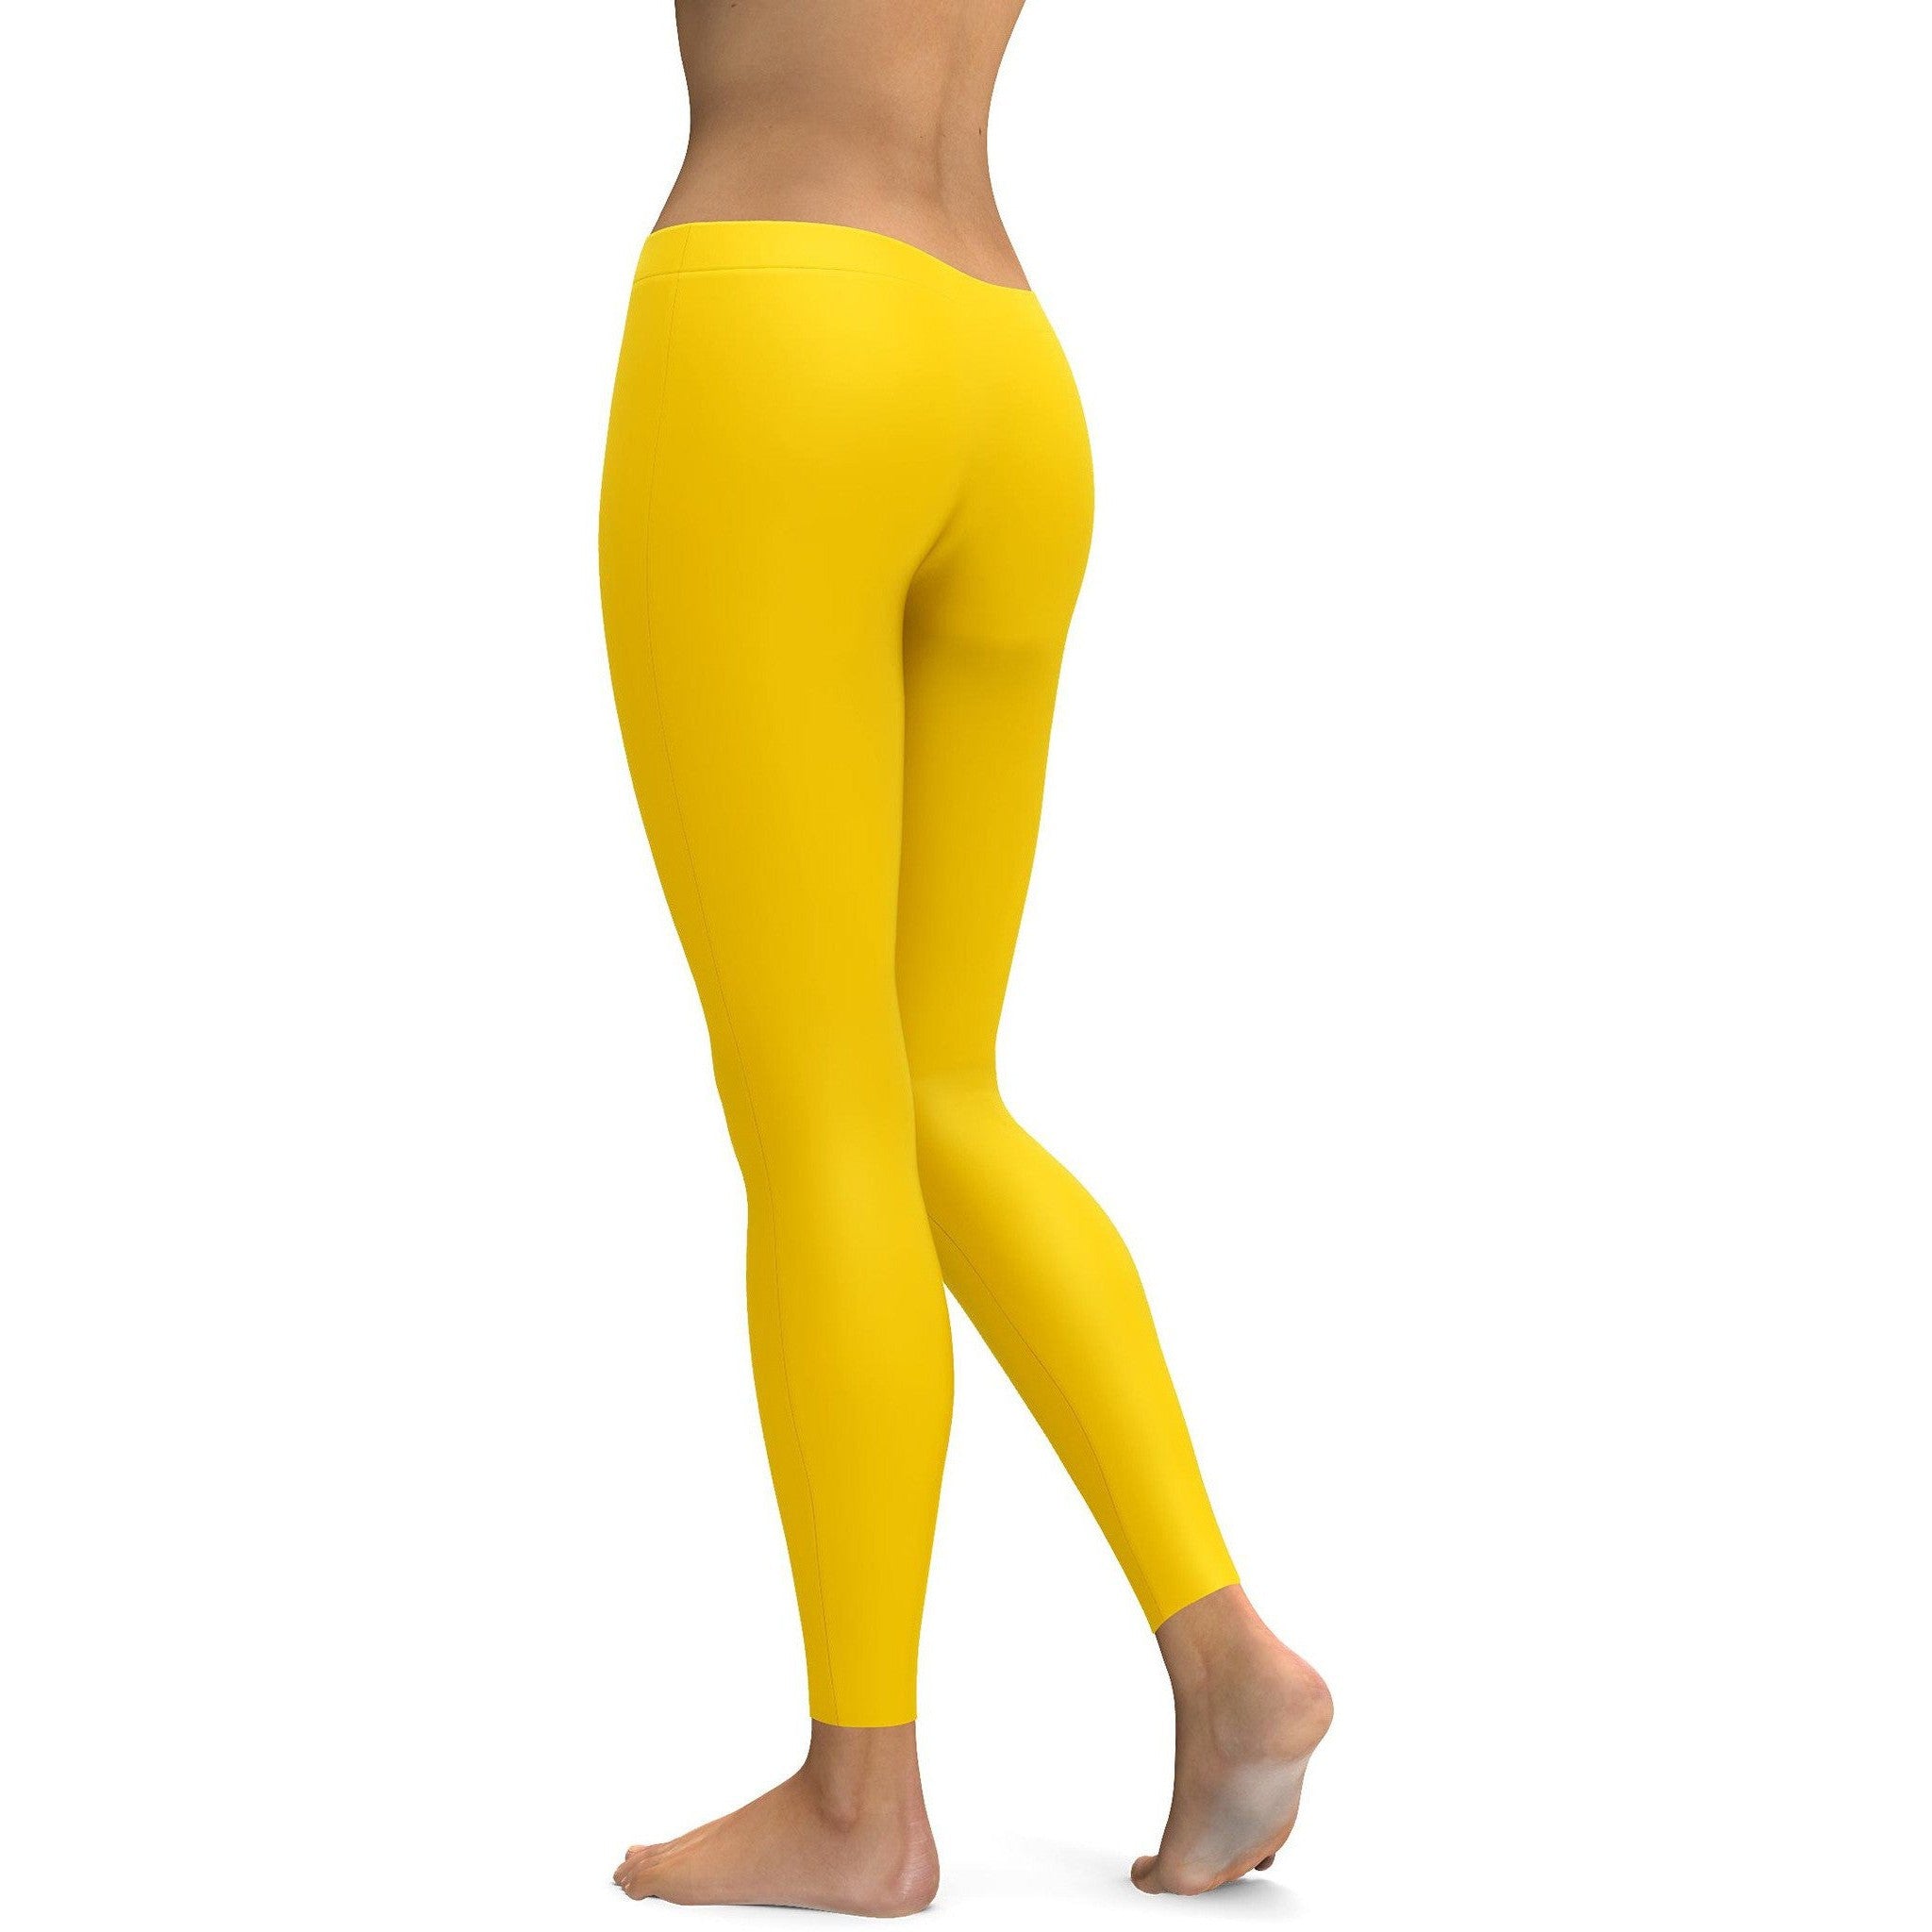 FAIWAD High Waisted Leggings for Women Stretch Soft Athletic Pants Running  Workout Sweatpants (X-Large, Yellow) - Walmart.com